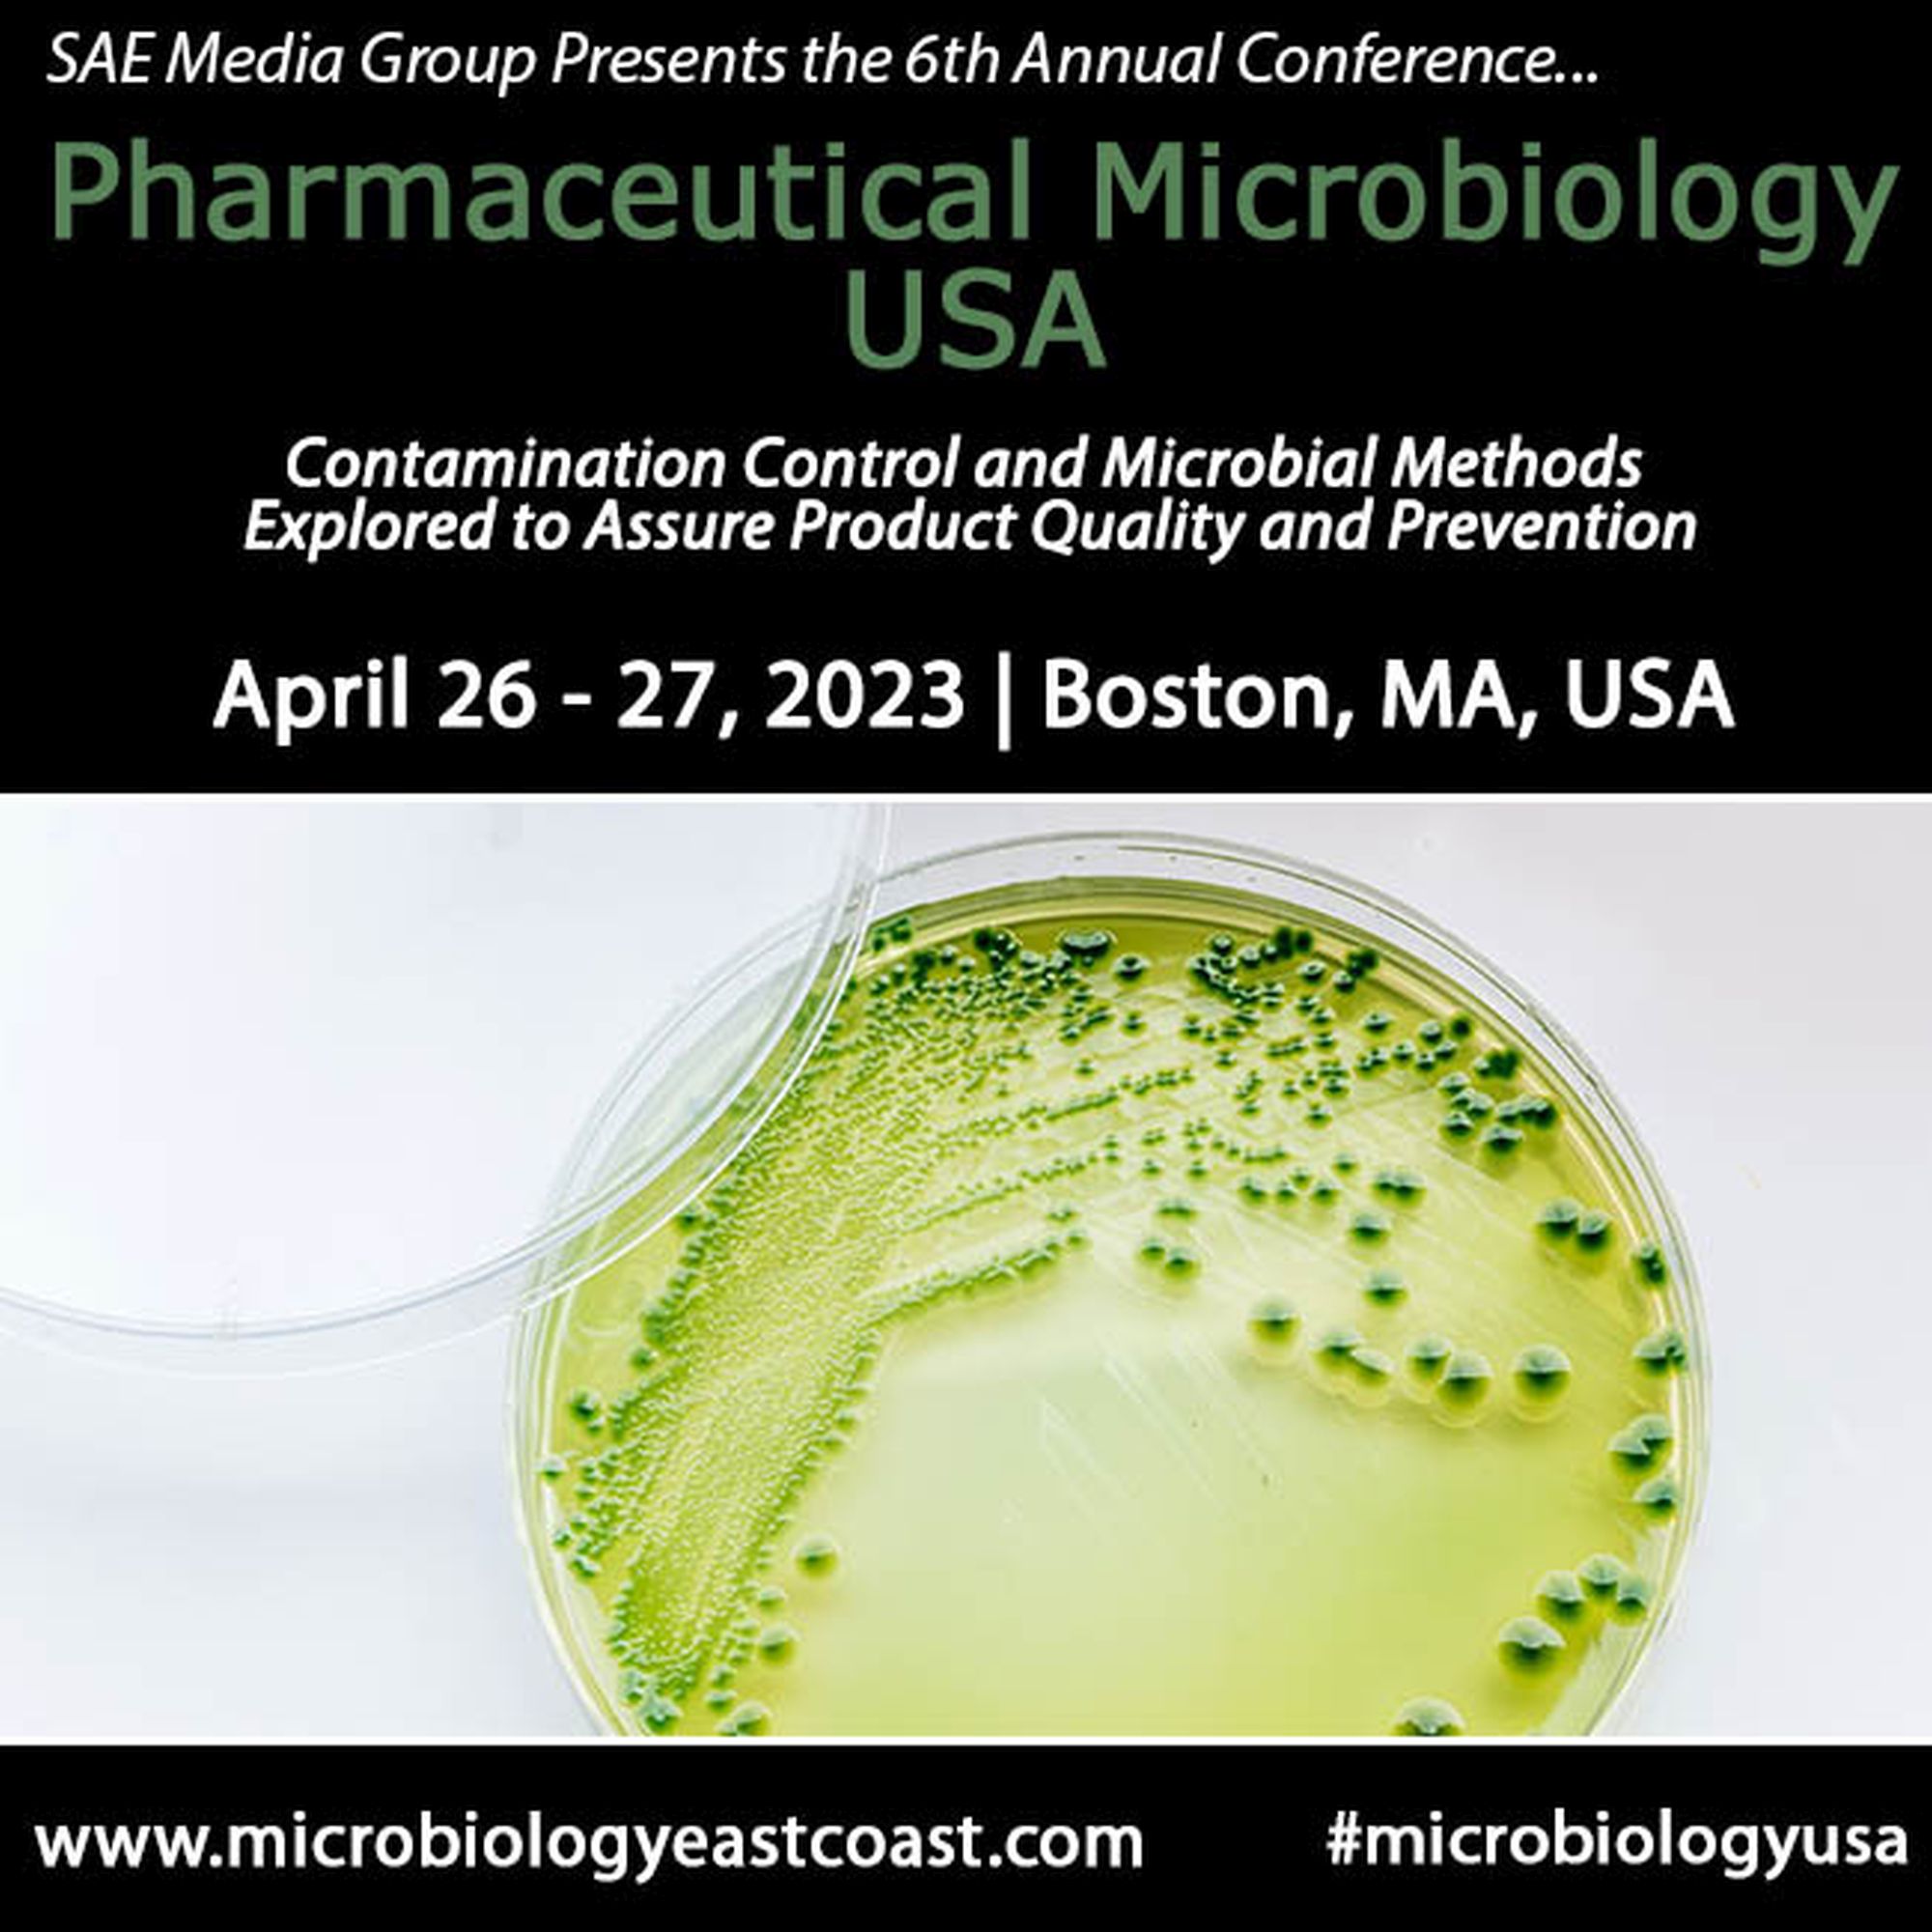 6th Annual Pharmaceutical Microbiology USA Conference, Boston, Massachusetts, United States